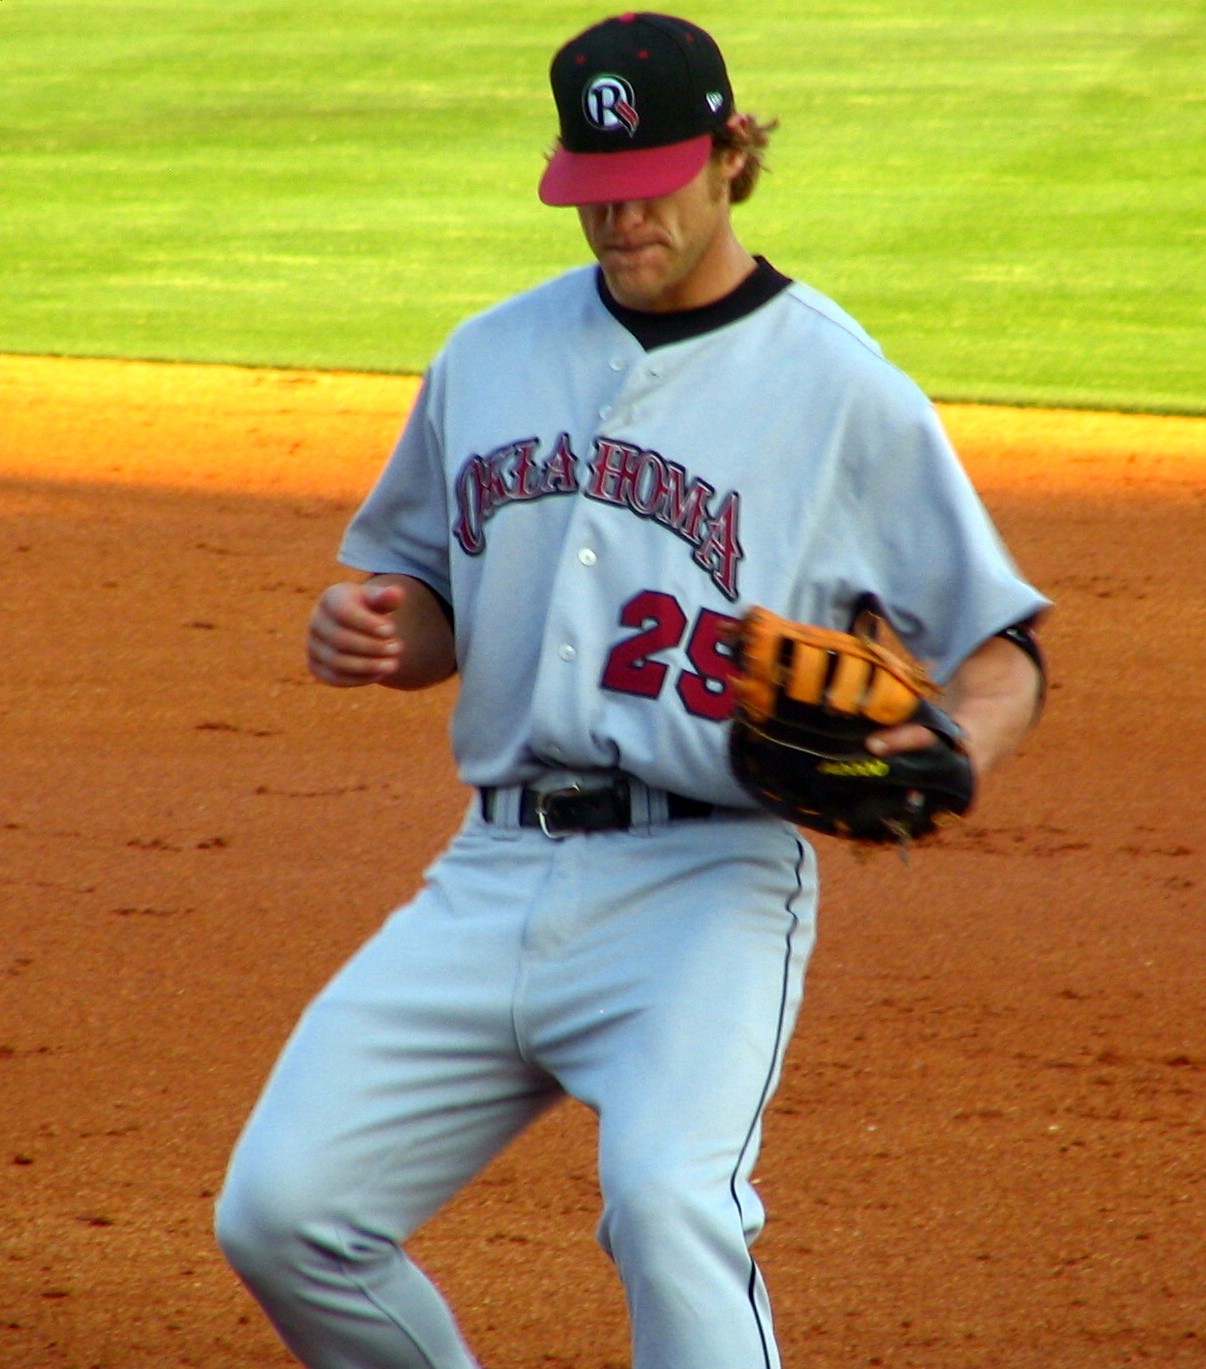 a baseball player standing on the field in the middle of a play